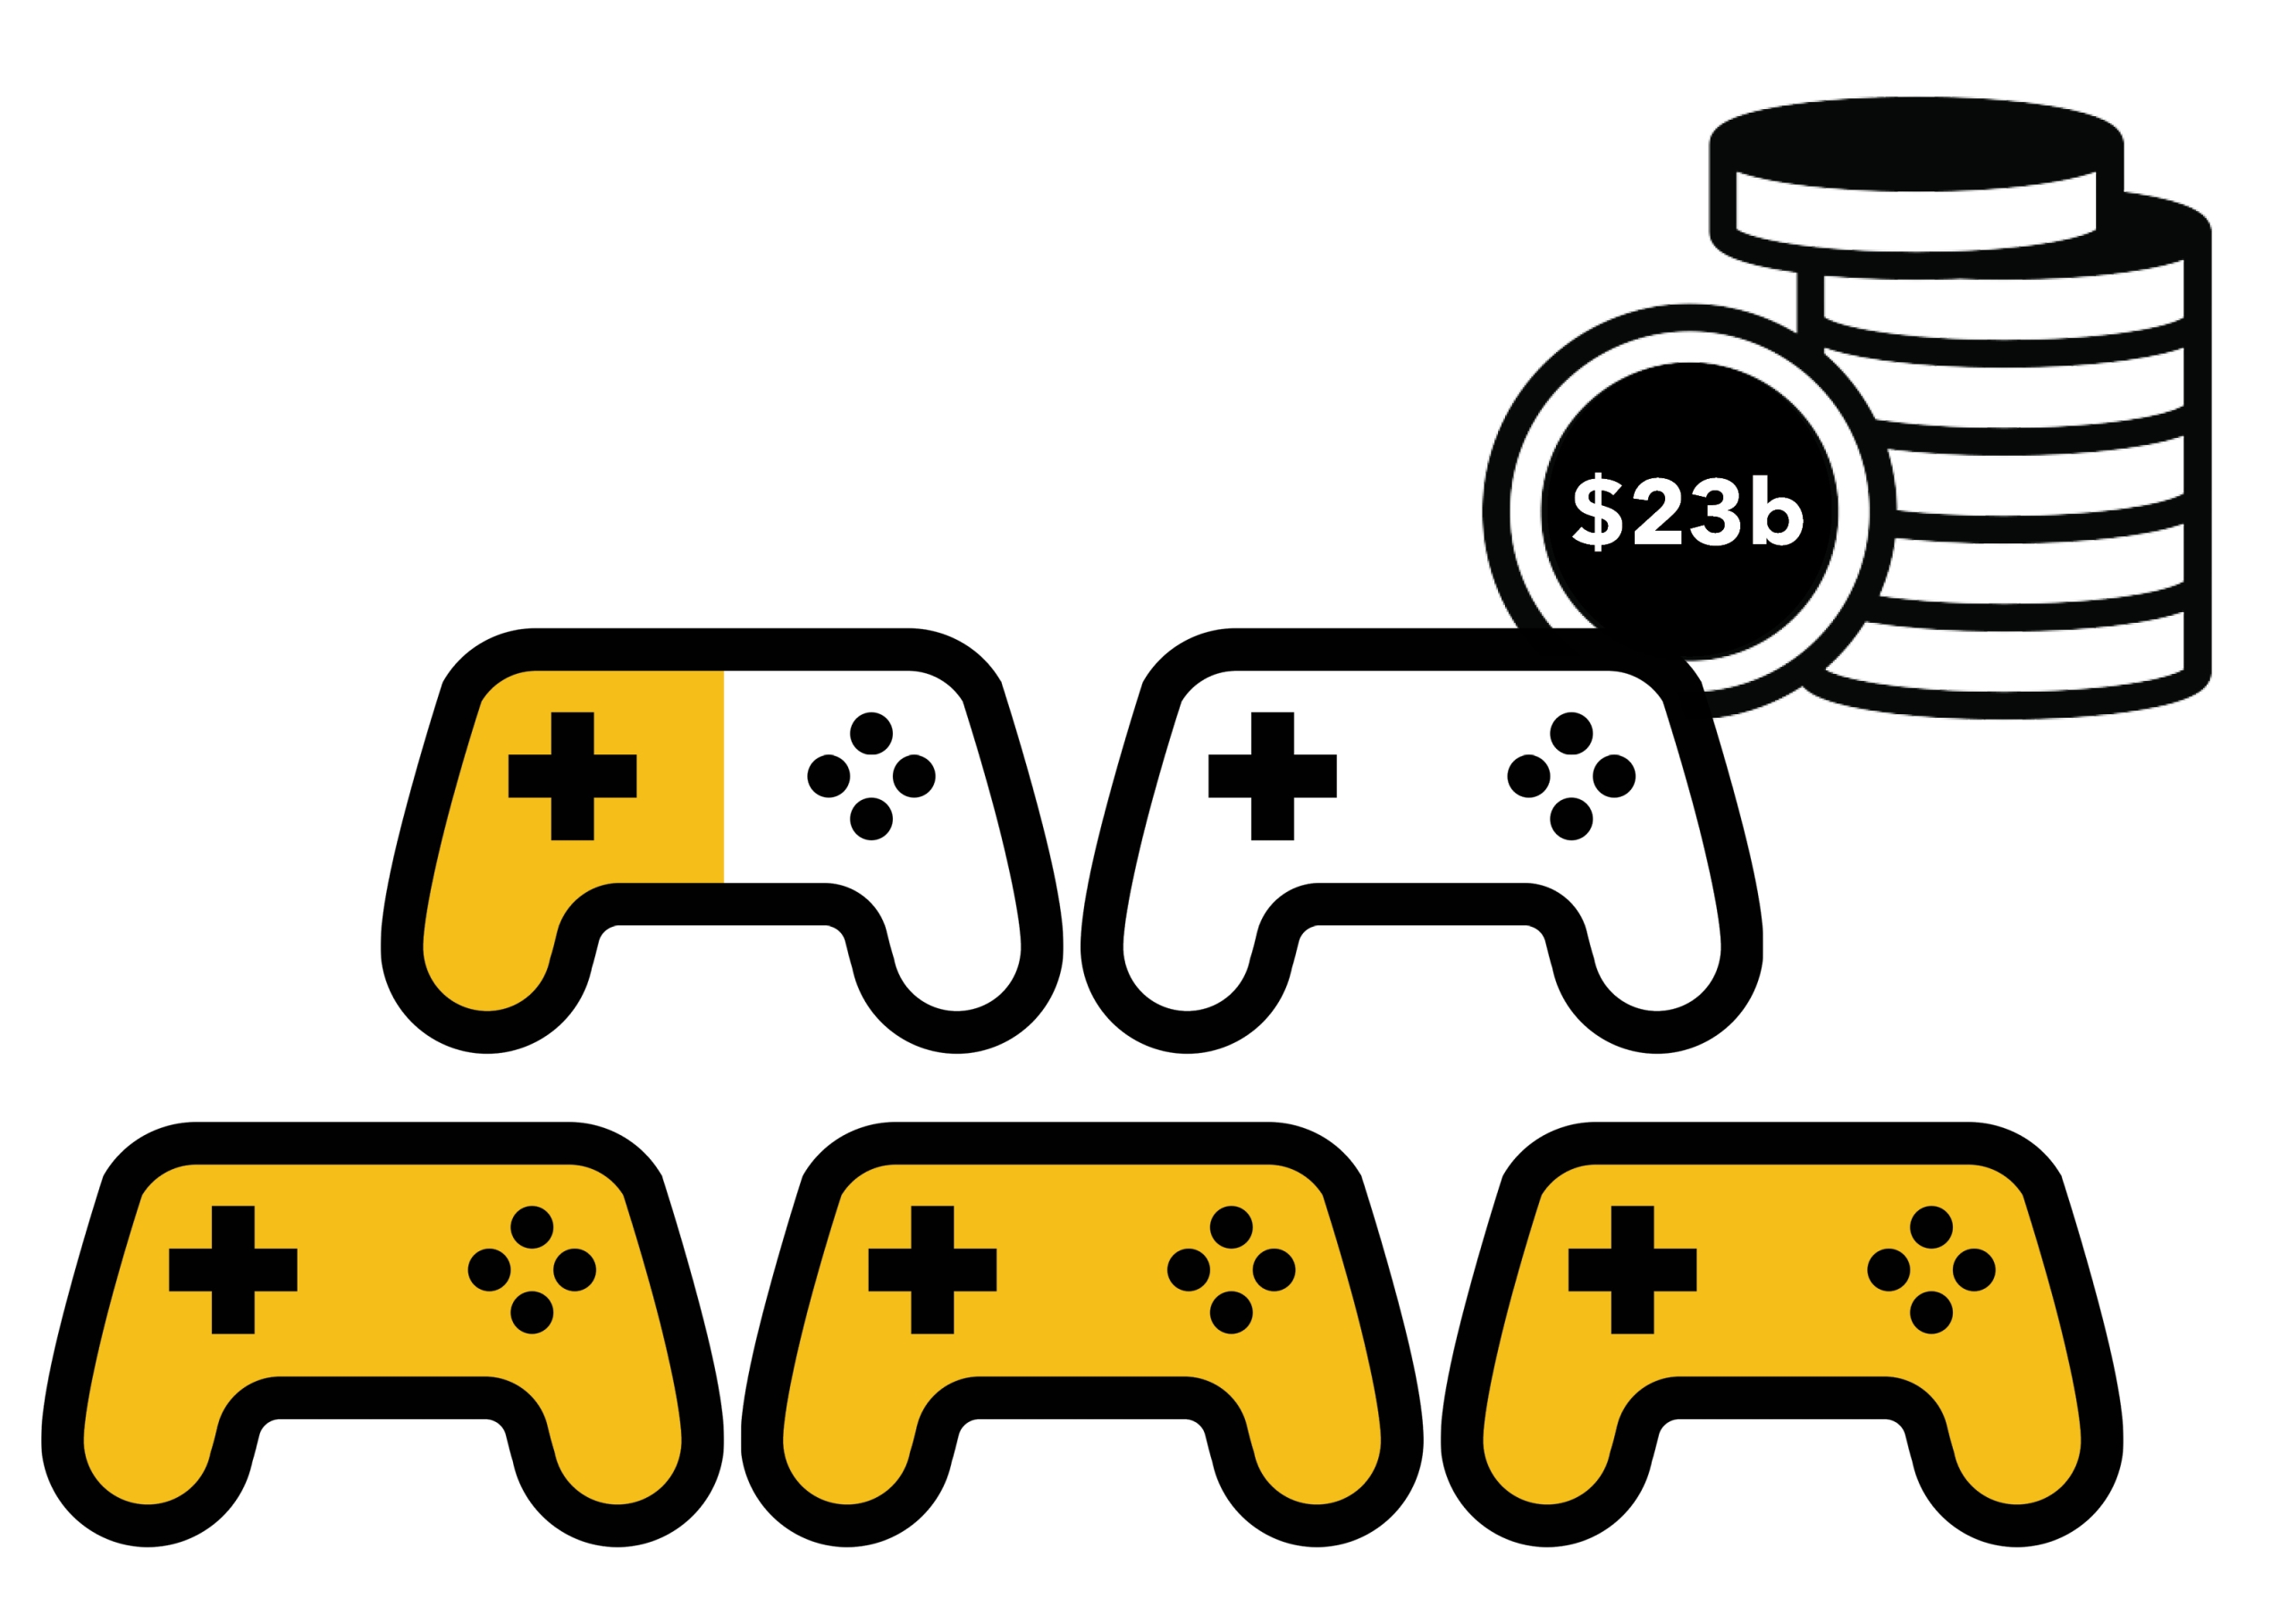 Image of video game controllers depicting that 3.5 out of every 5 gamers have been exposed to loot boxes in video games. This is $23 billion dollar industry.